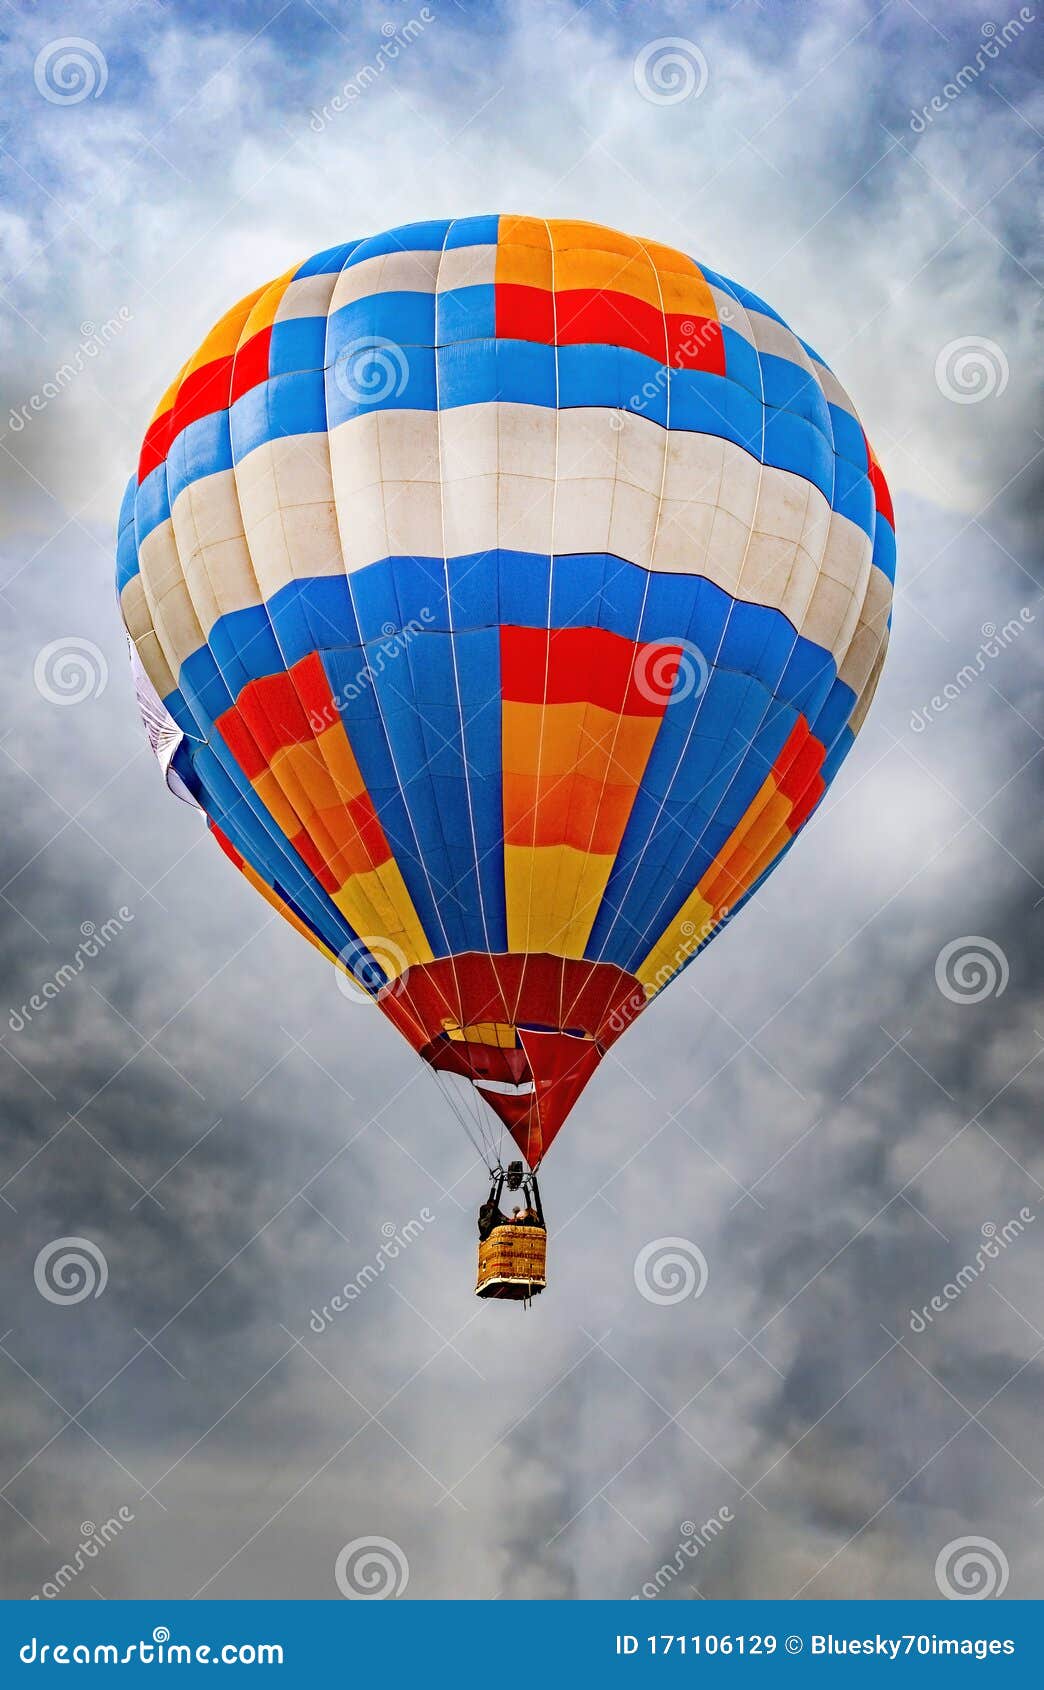 colorful airballoon in a dangerous flight up